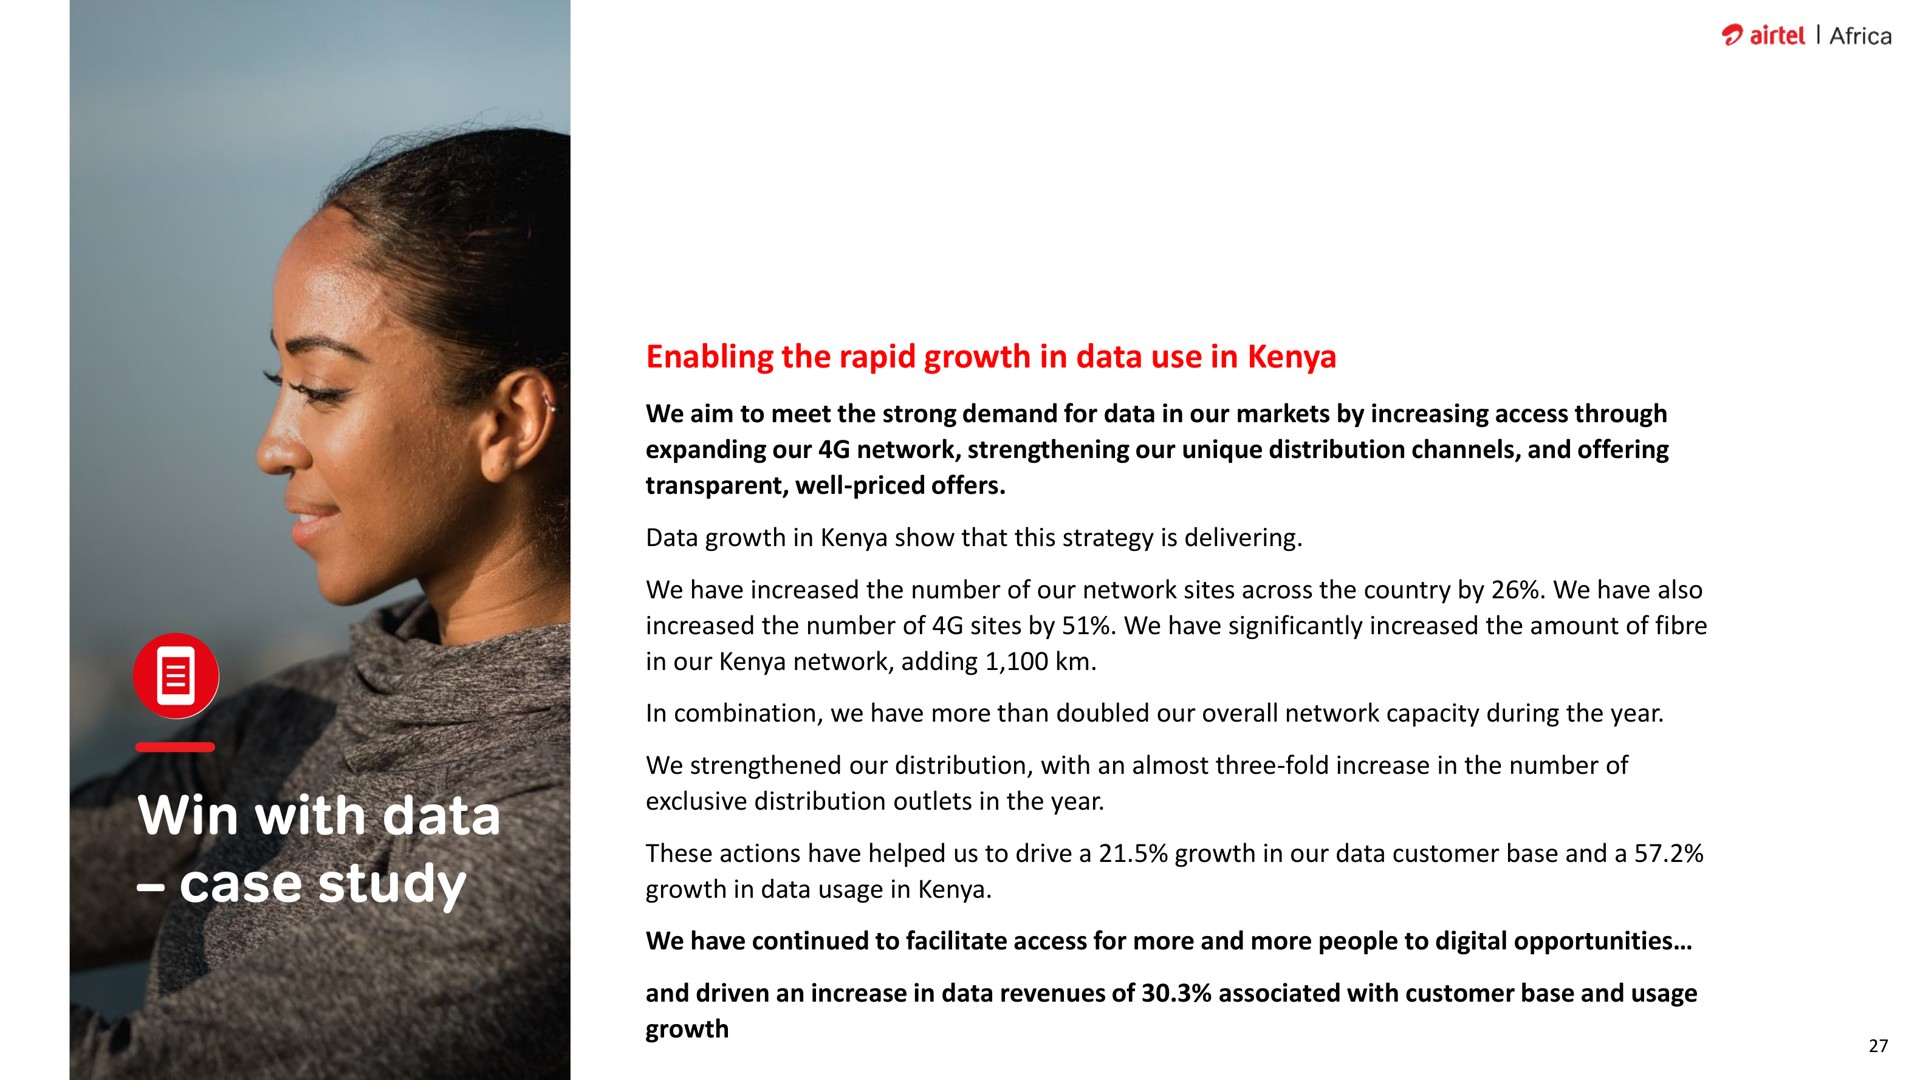 win with data case study enabling the rapid growth in use in mero a | Airtel Africa